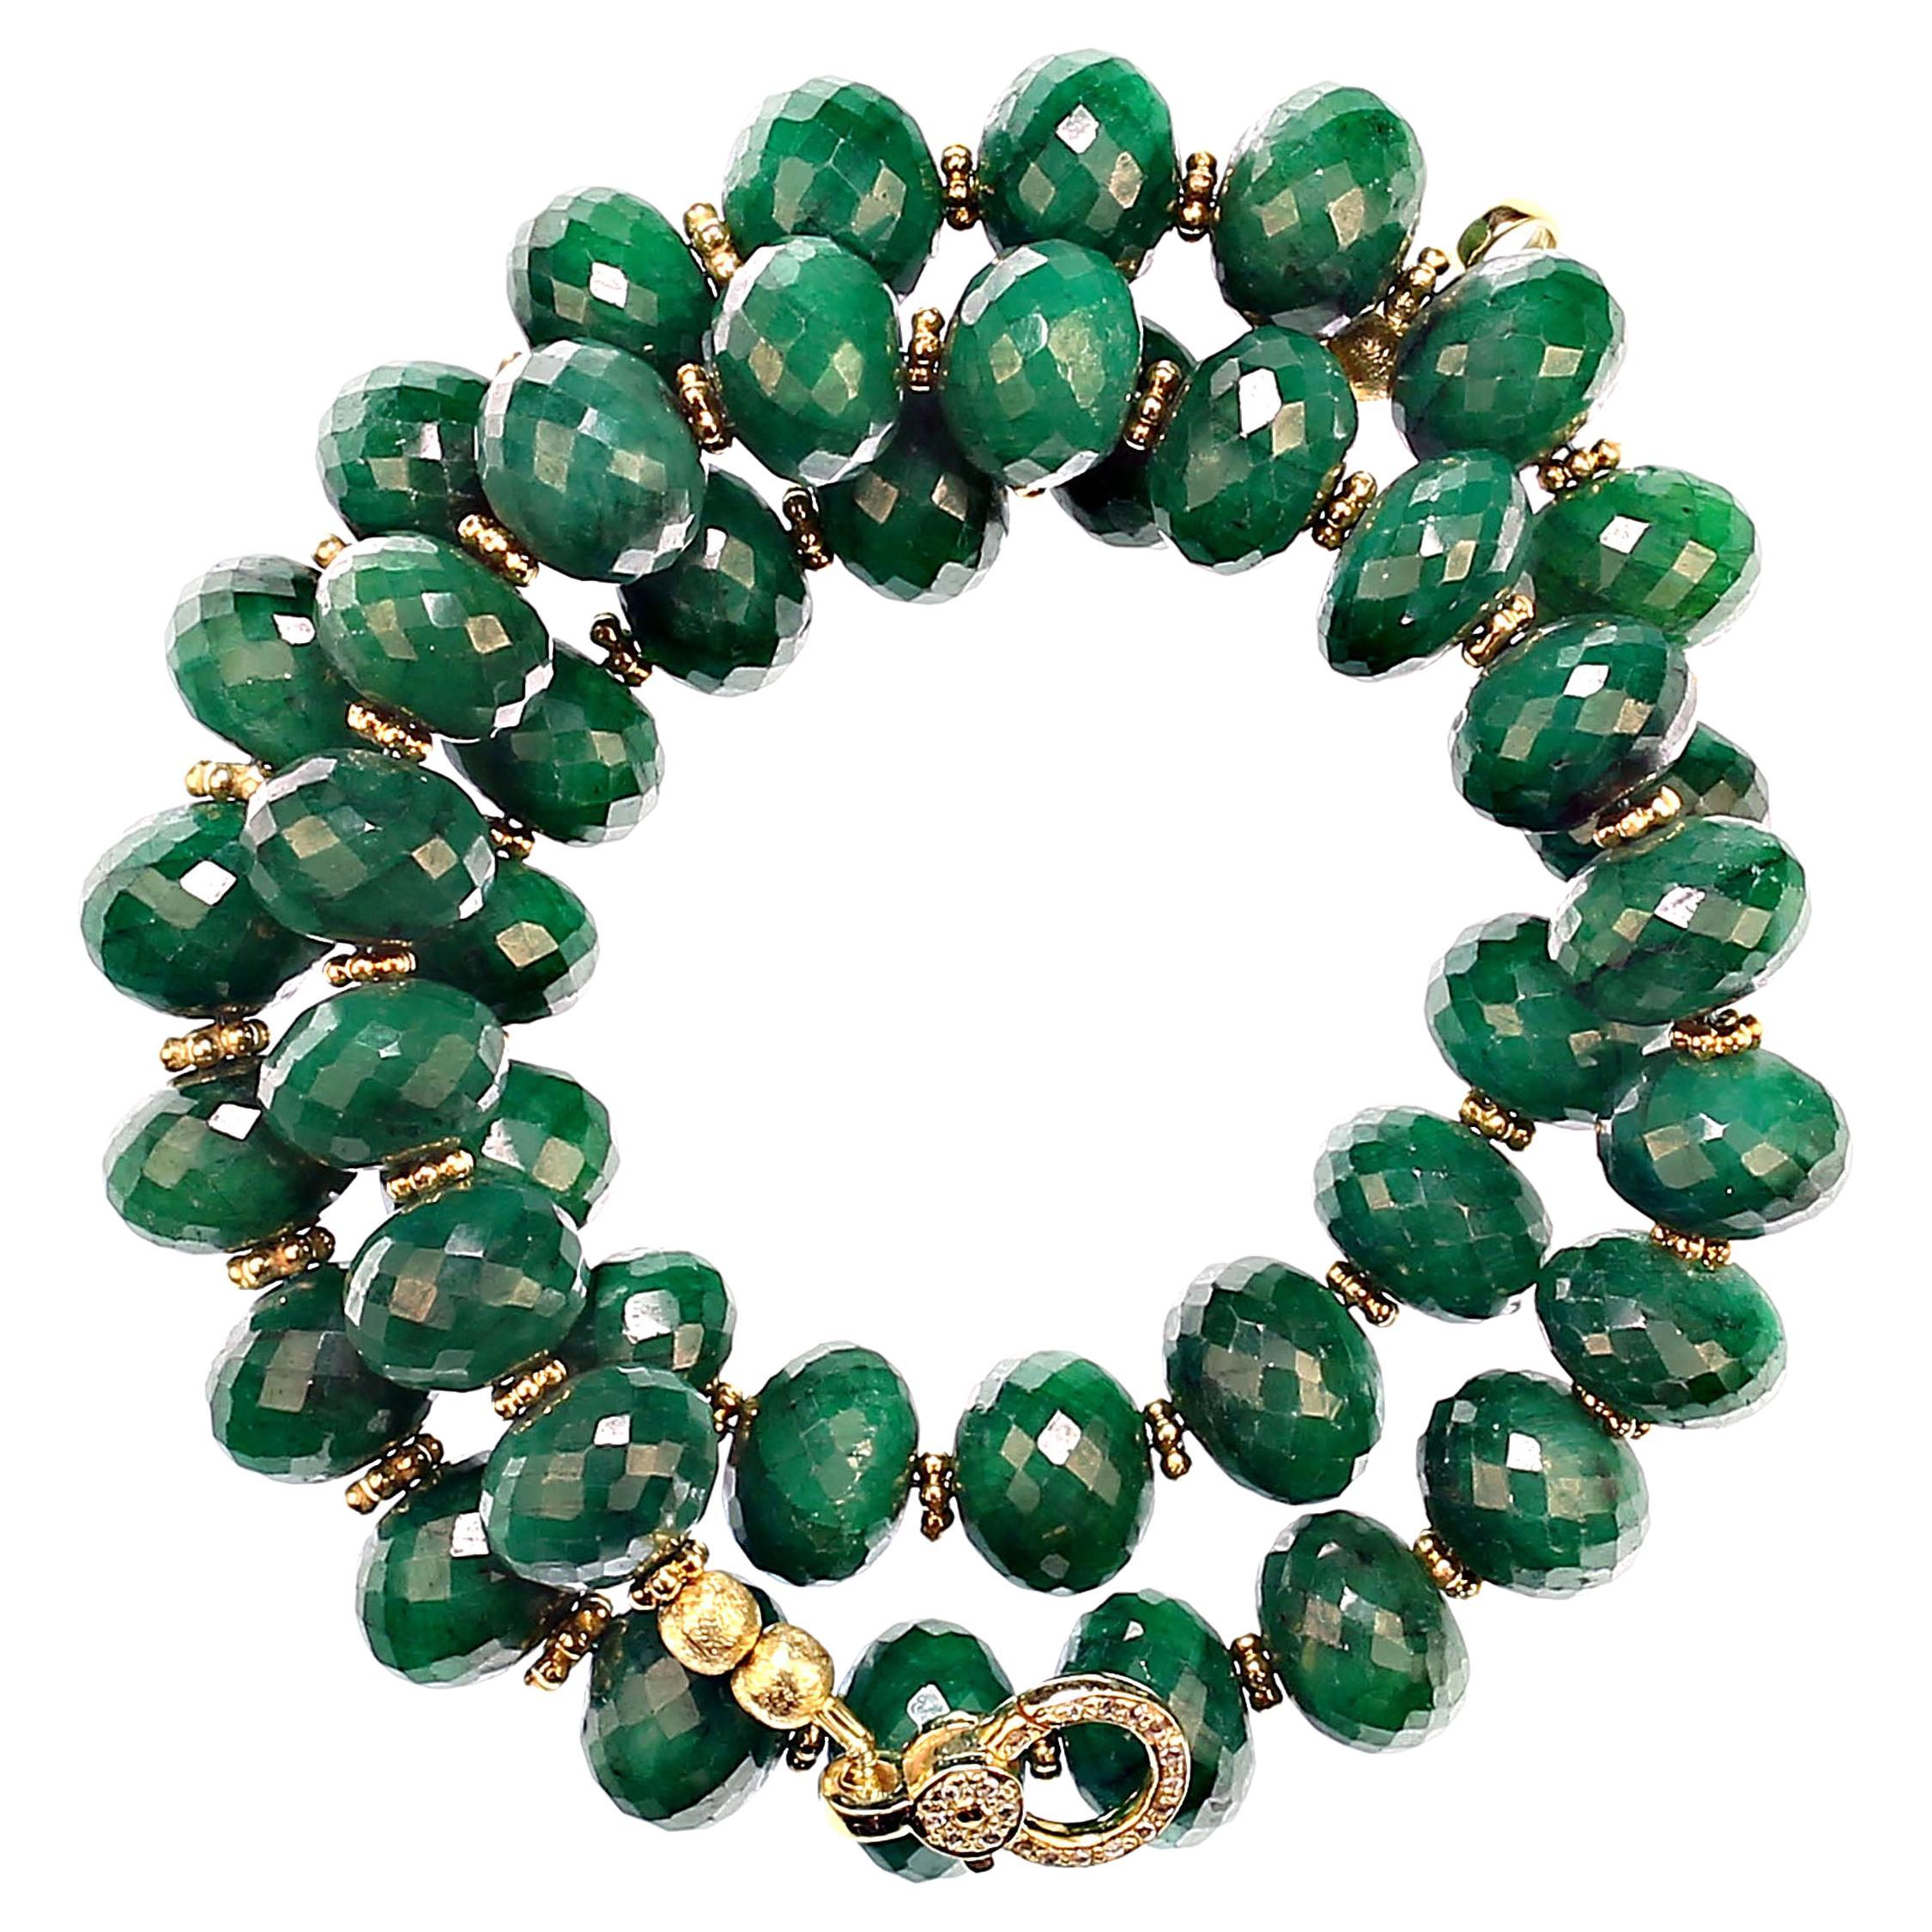 Artisan AJD Simply Elegant Emerald necklace with goldy accents 18 Inch For Sale